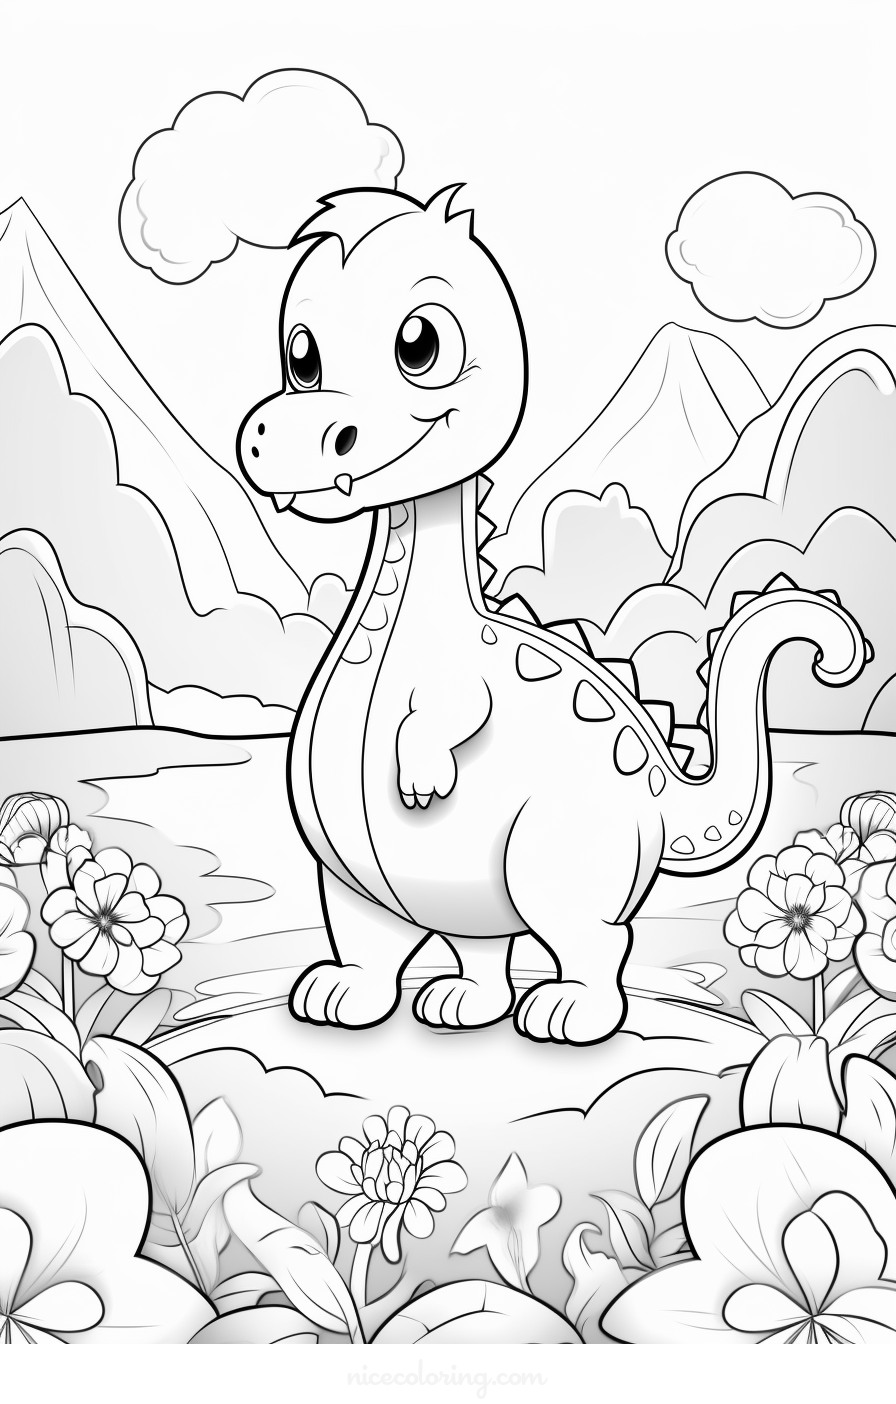 A detailed dinosaur scene coloring.